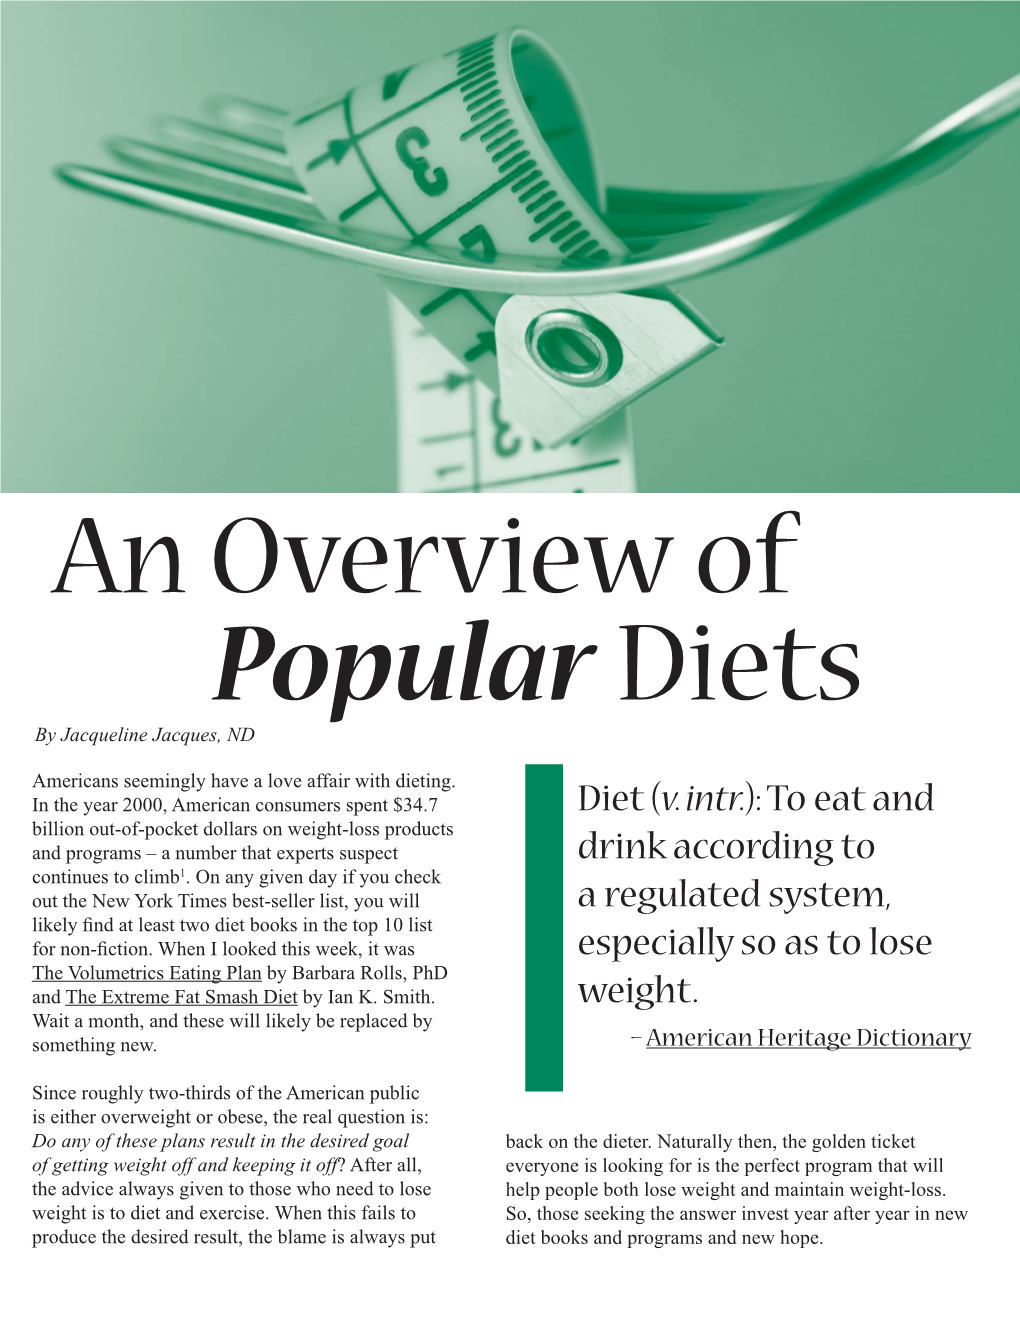 Overview of Popular Diets.Indd